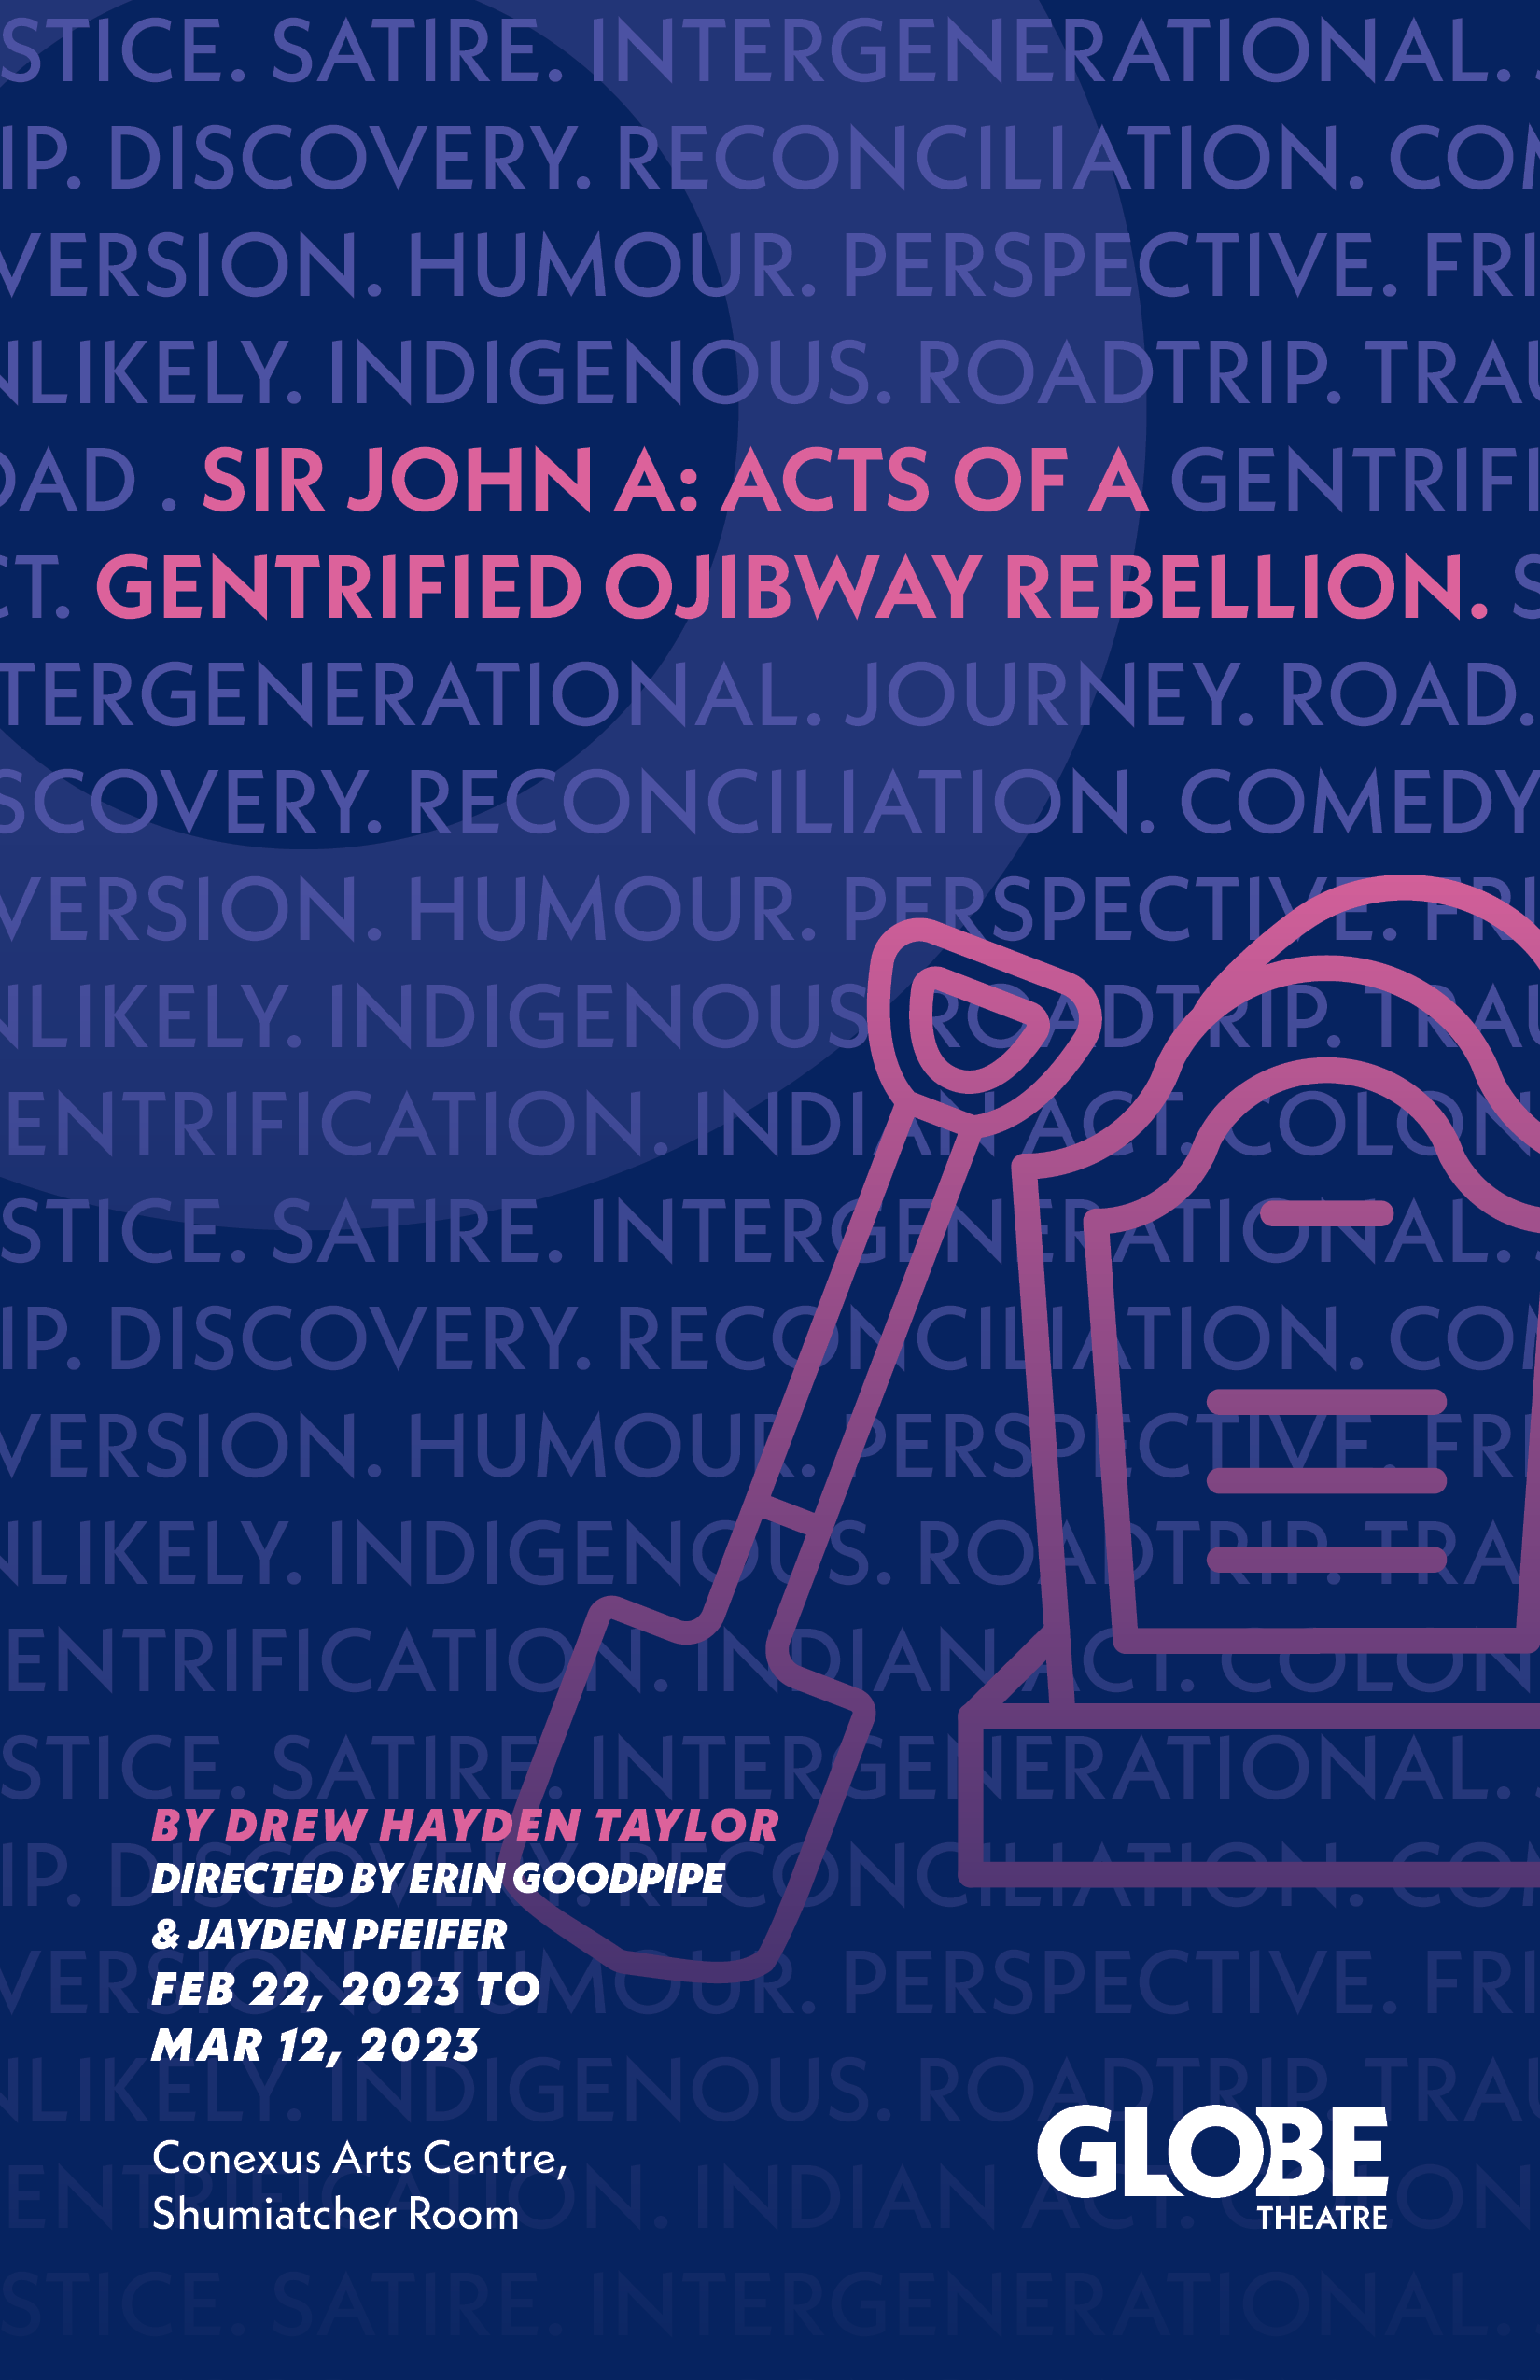 Sir John A:Acts of a Gentrified Ojibway Rebellion Poster